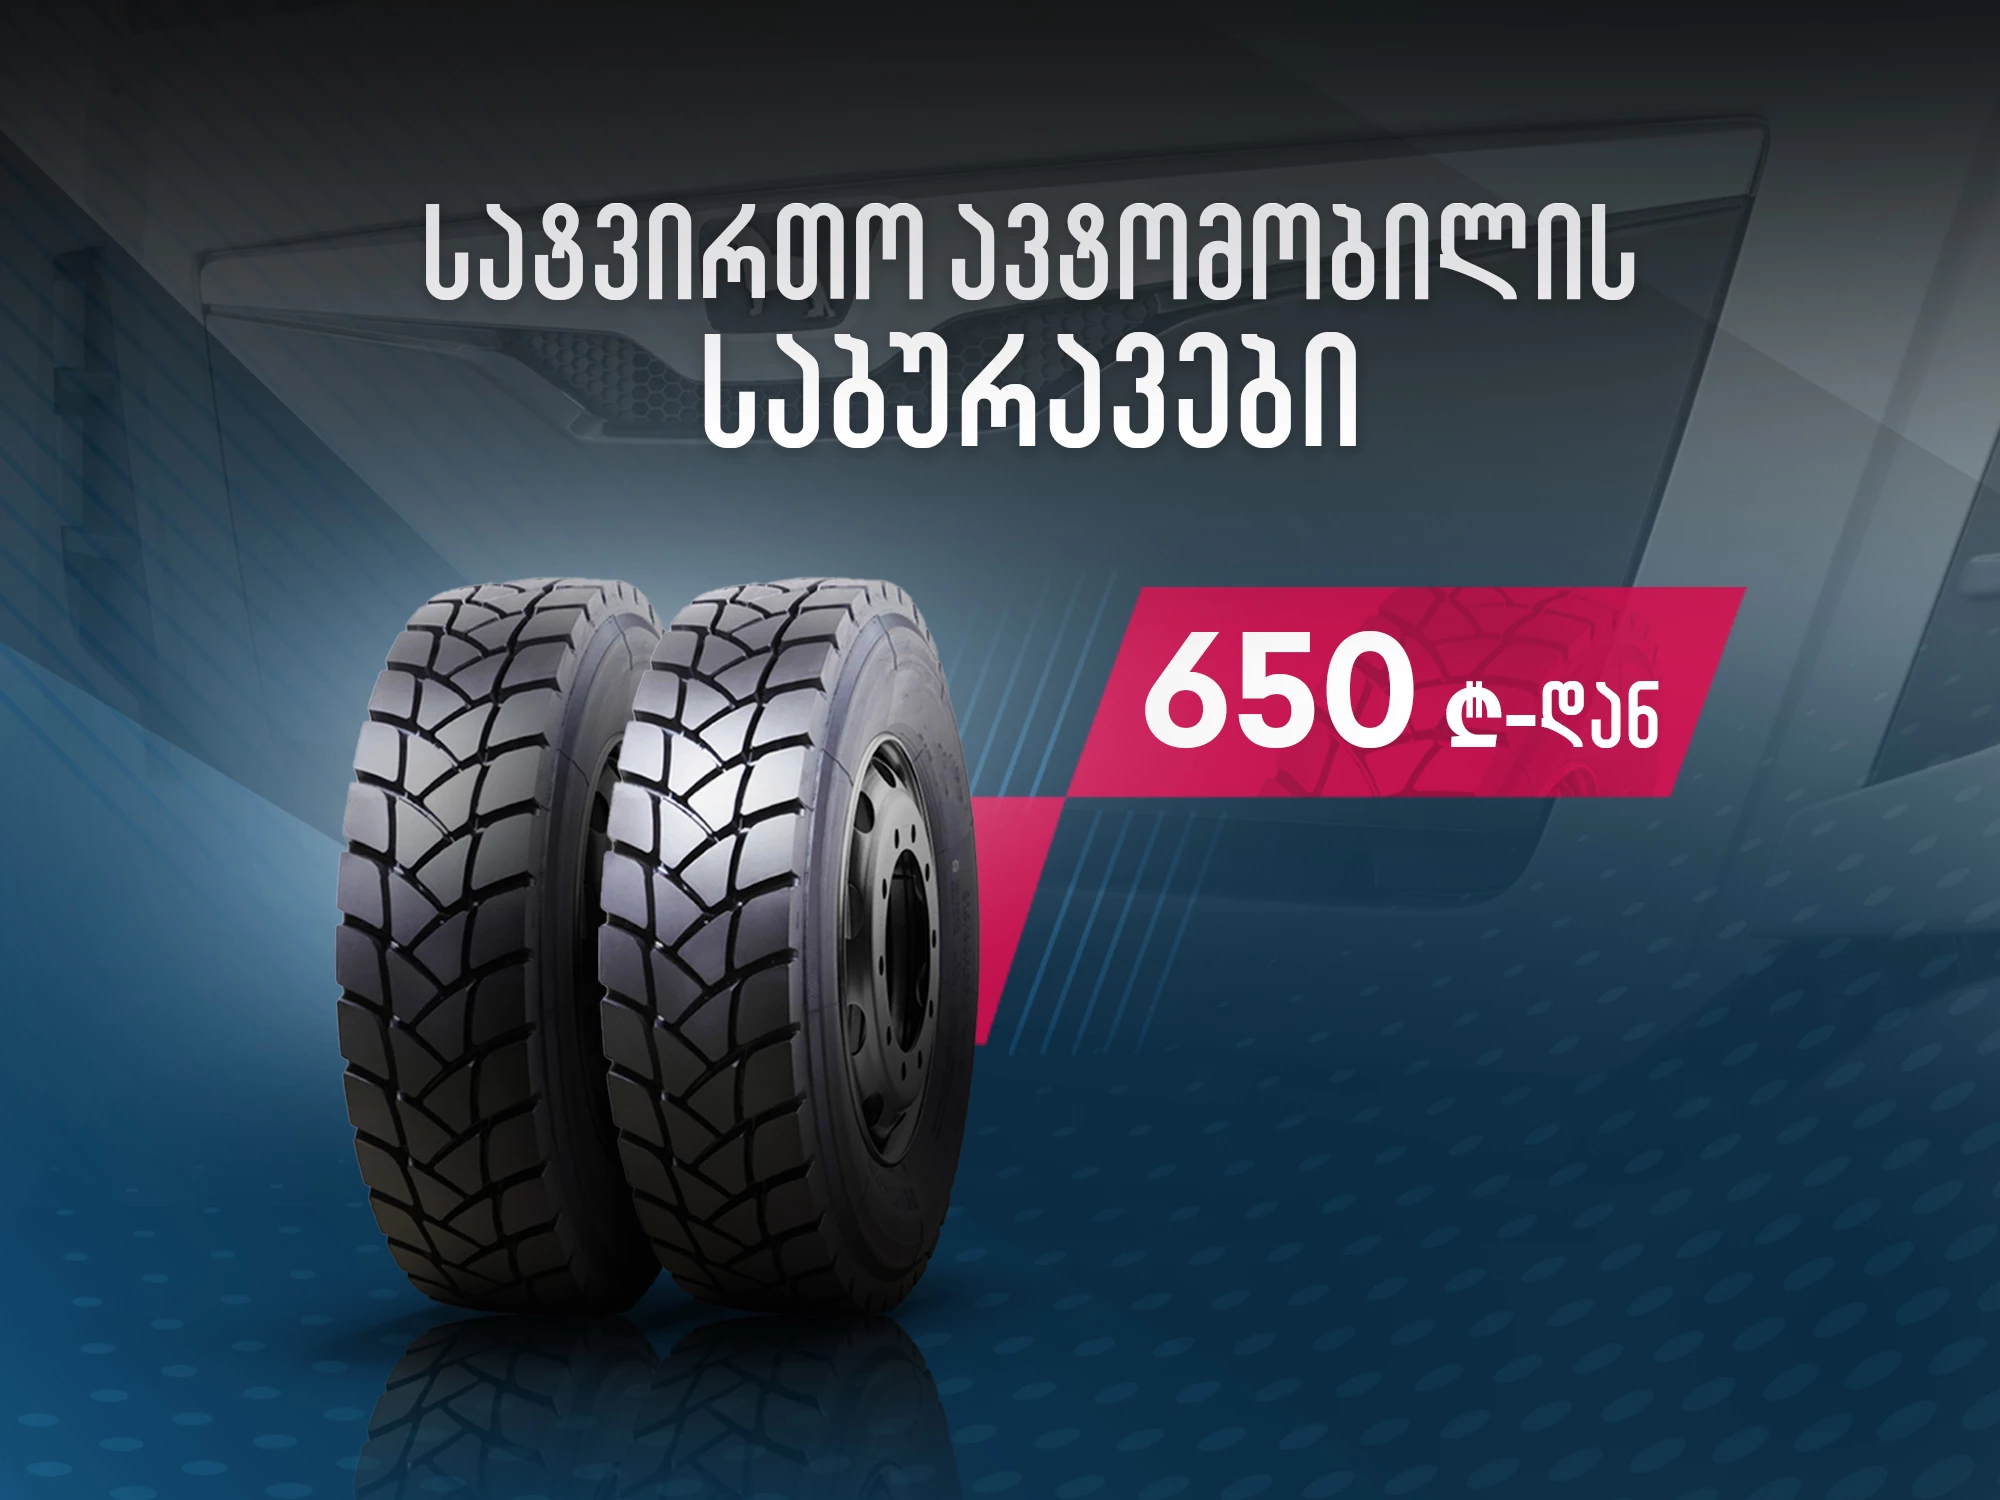 commercial-motor-vehicle-tyres-from-650-gel